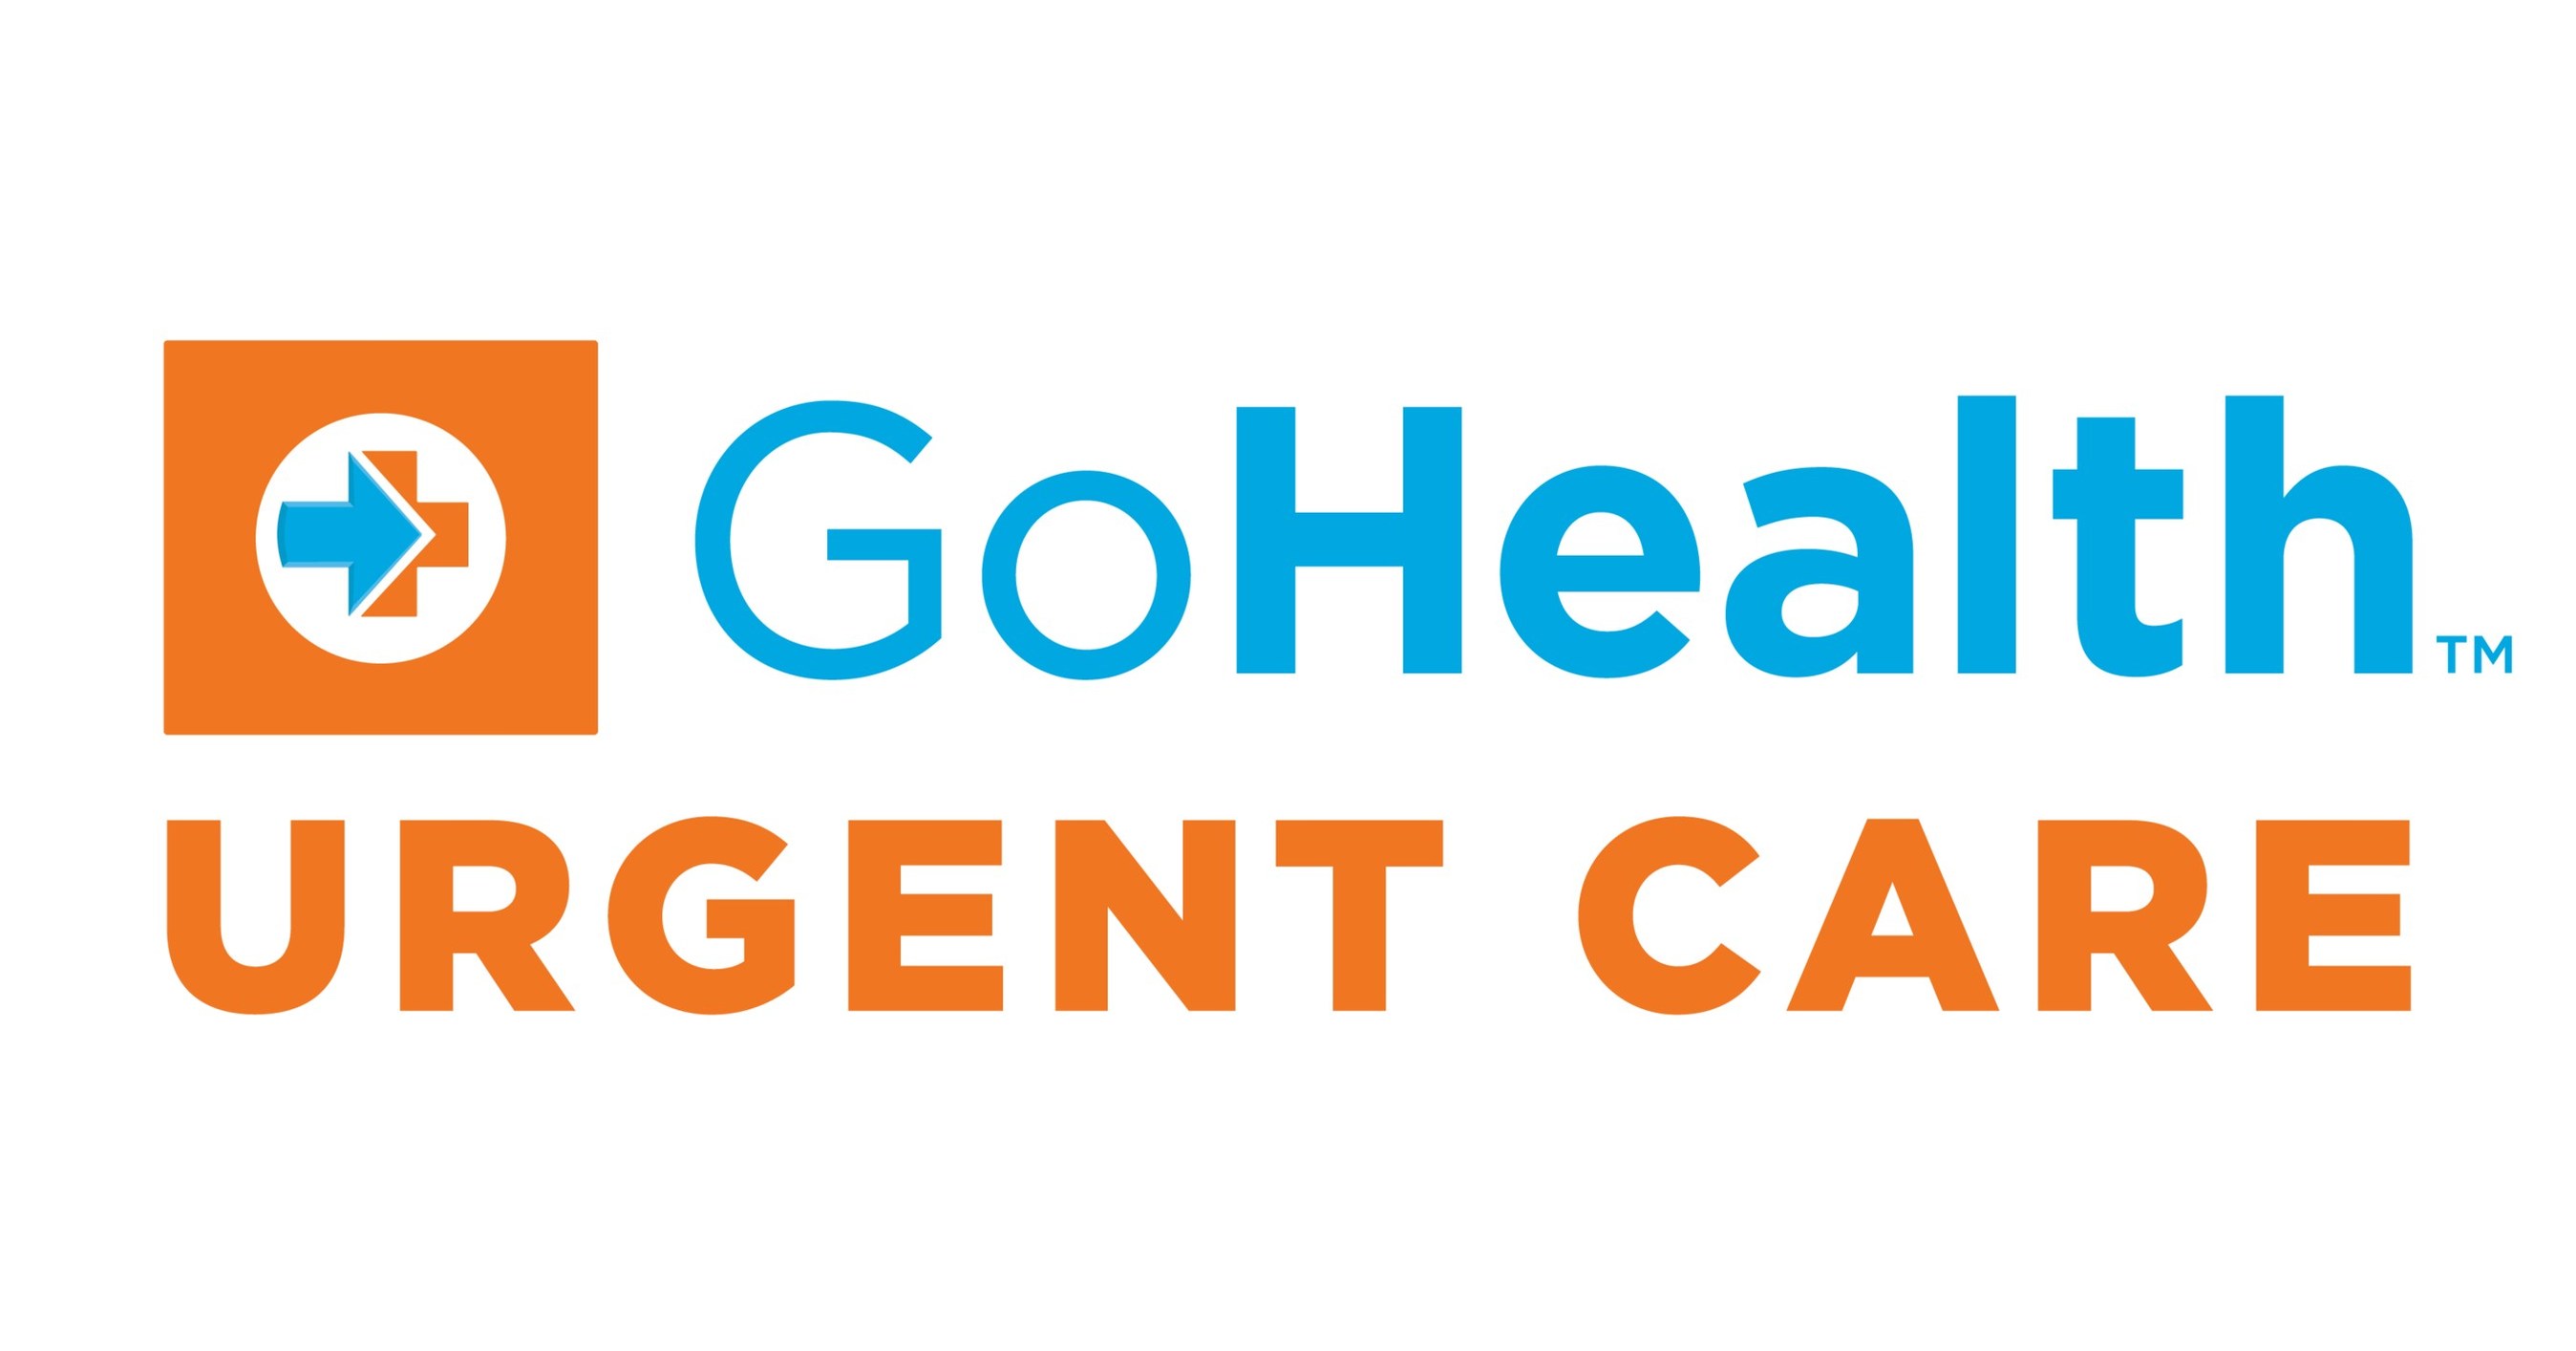 Gohealth Urgent Care To Offer Covid-19 Antibody Testing To The Public From Coast To Coast